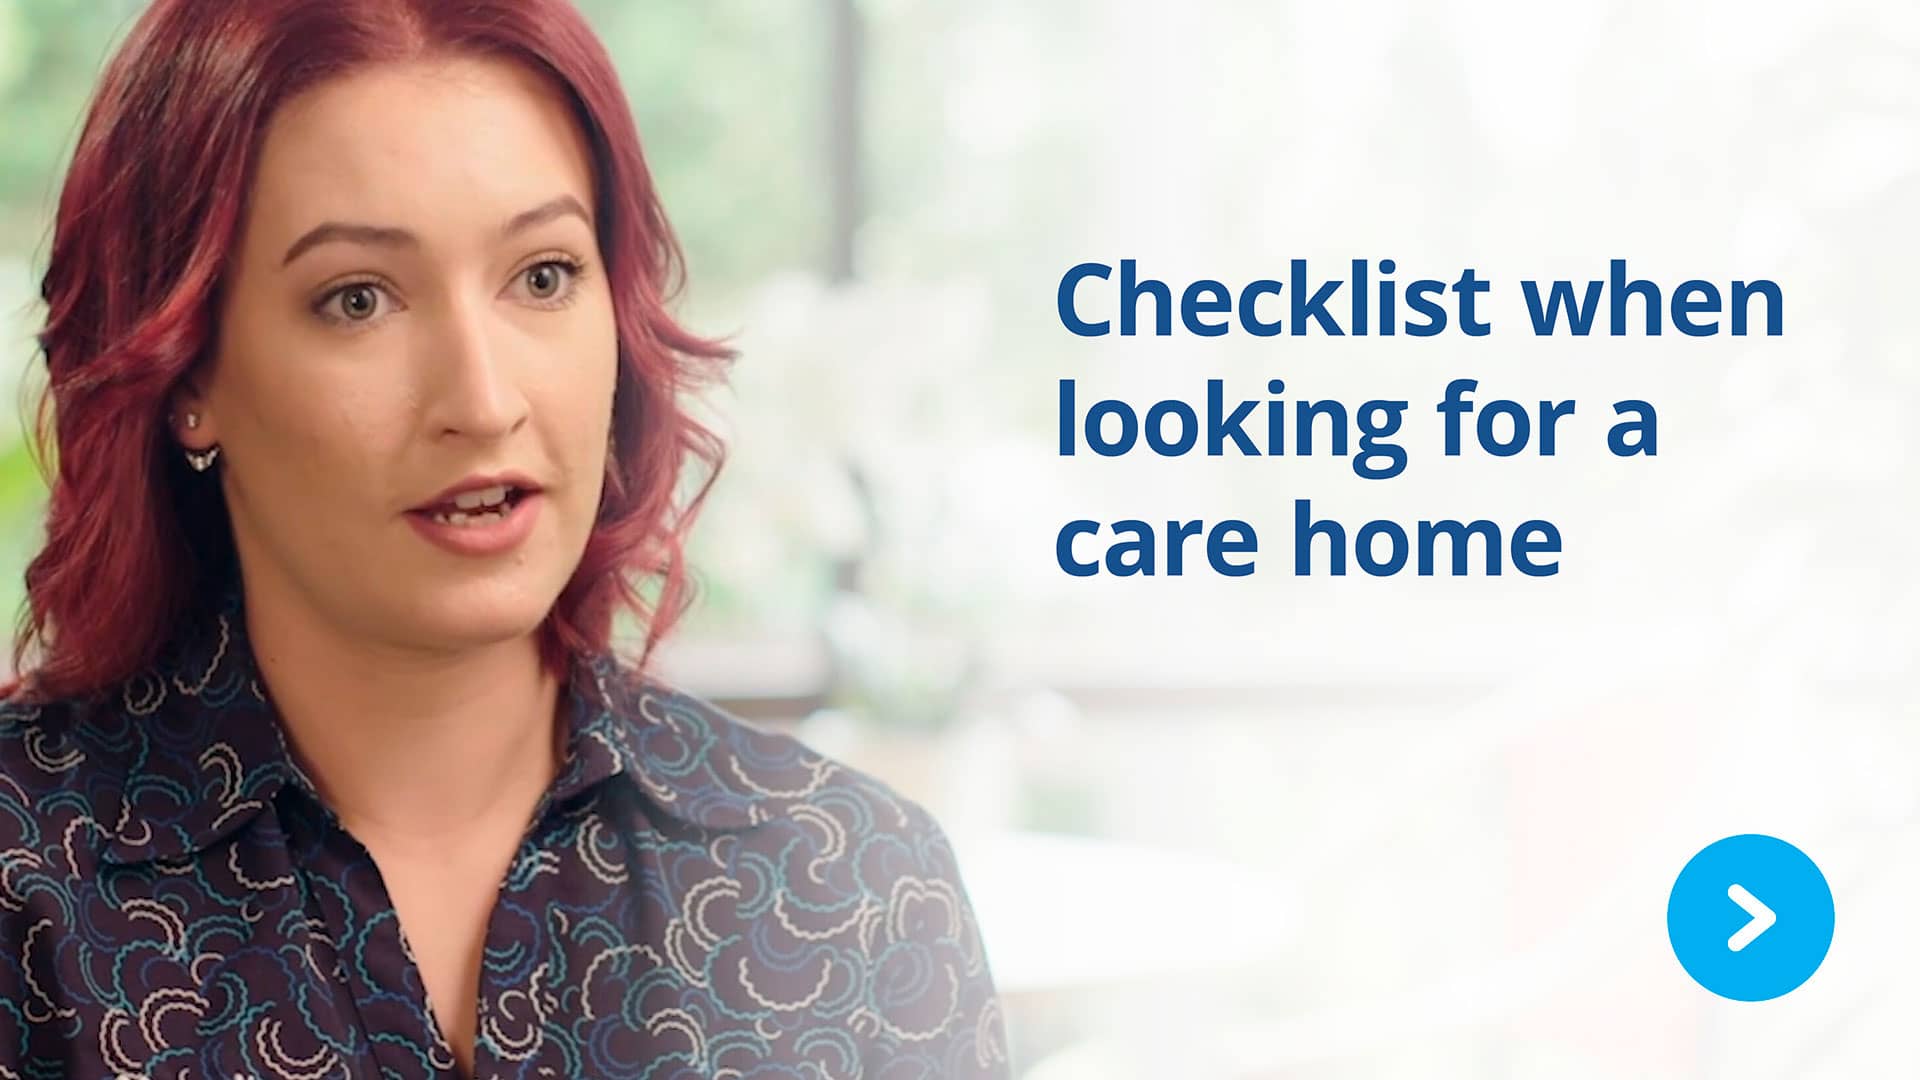 Checklist when looking for a care home